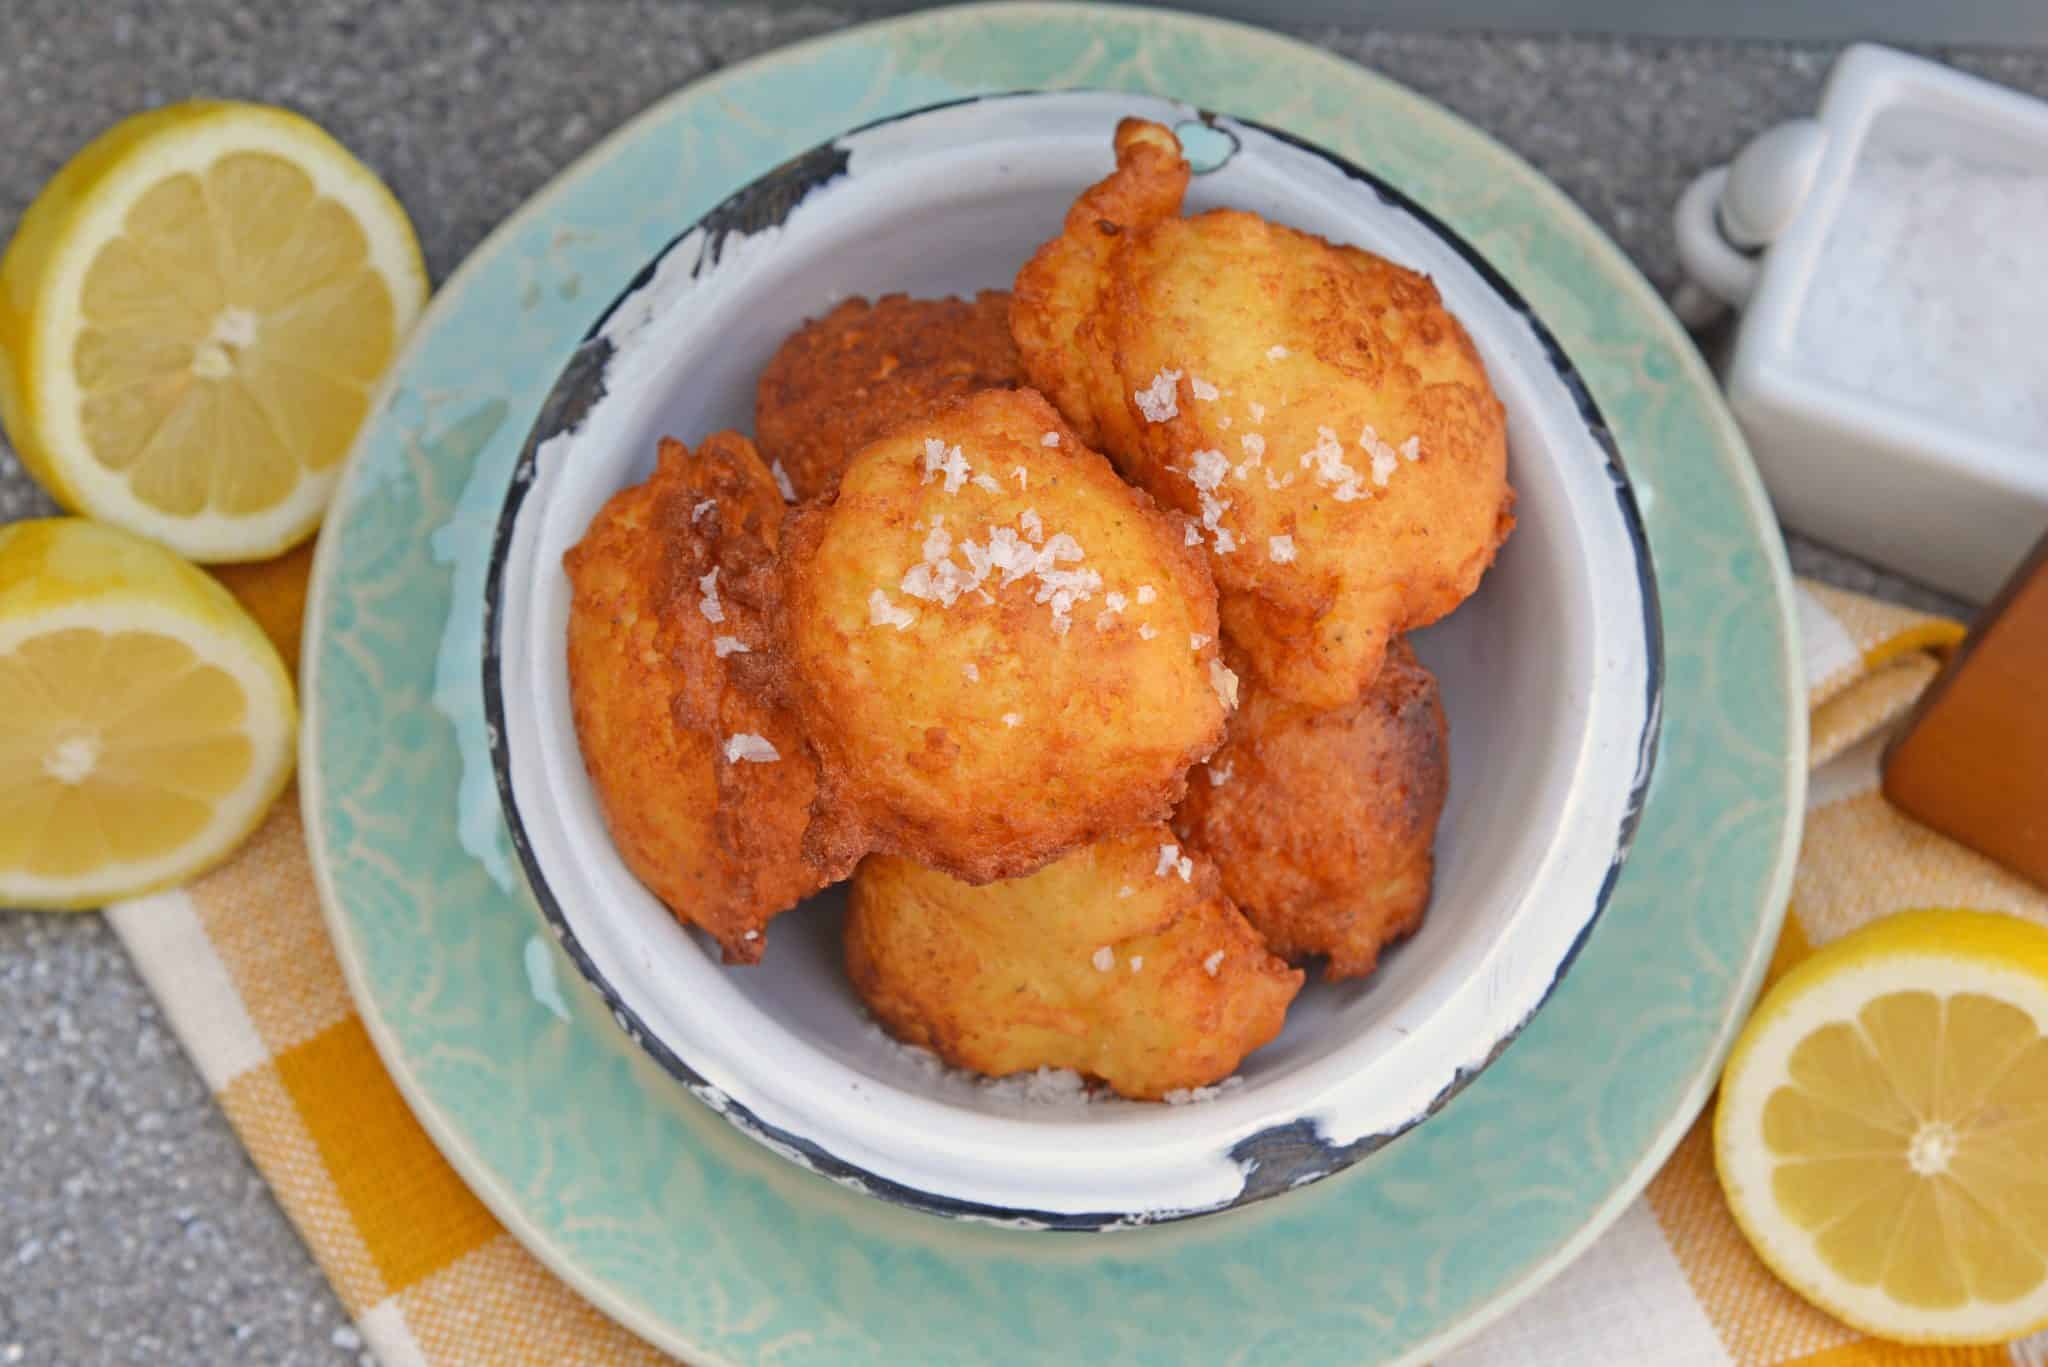 Lemon Ricotta Fritters are a savory fritter recipe. Smooth and and rich, they are filled with cheese with subtle lemon and sage. Served with garlic aioli!